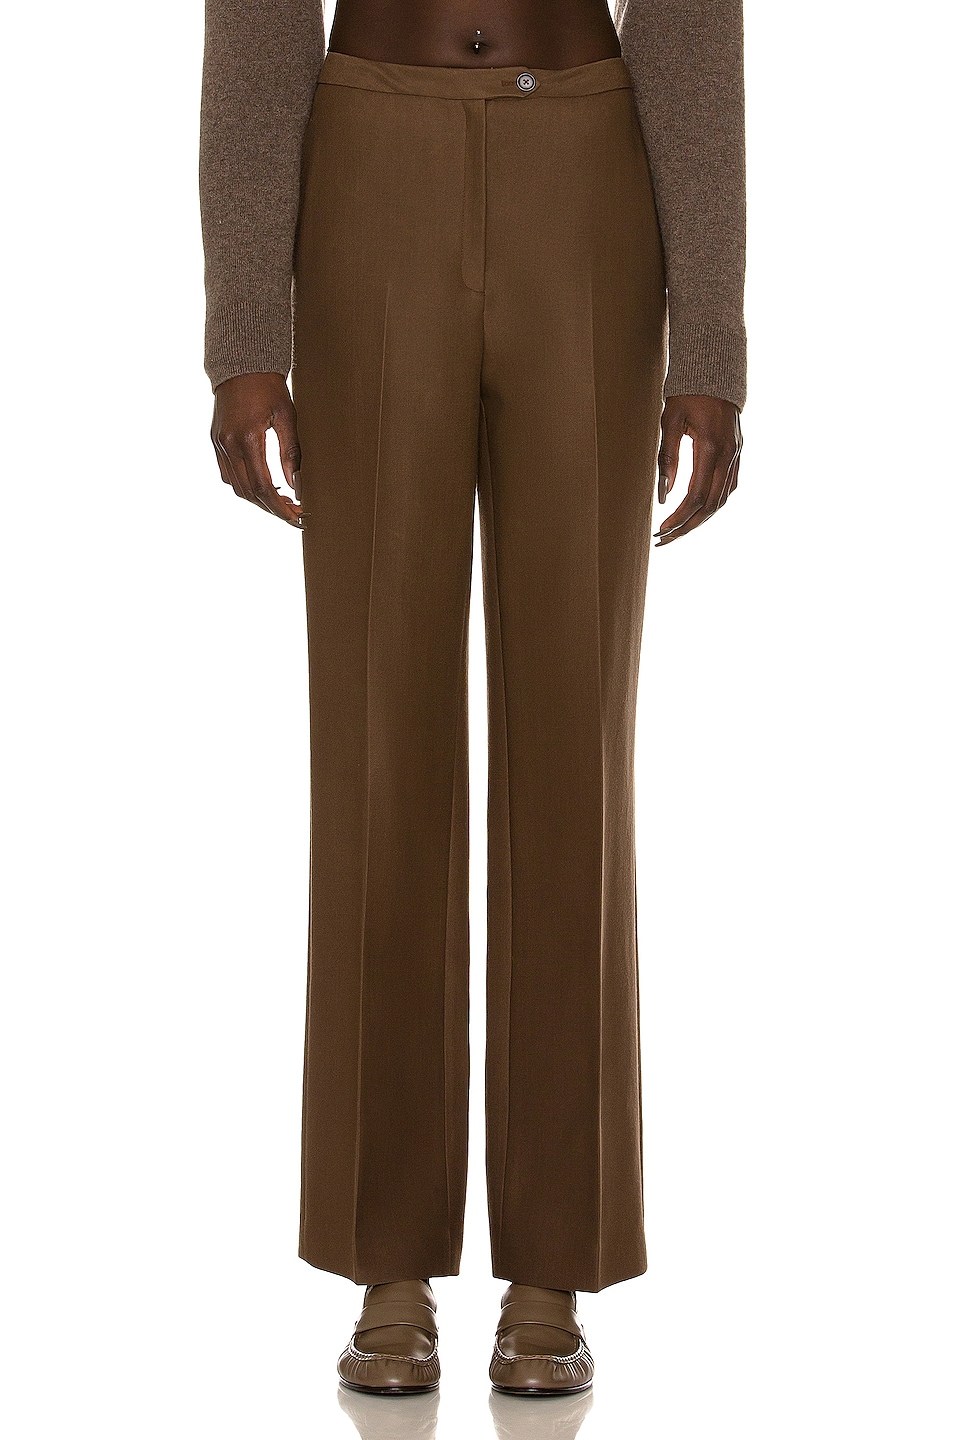 Image 1 of The Row Elia Pant in Warm Taupe